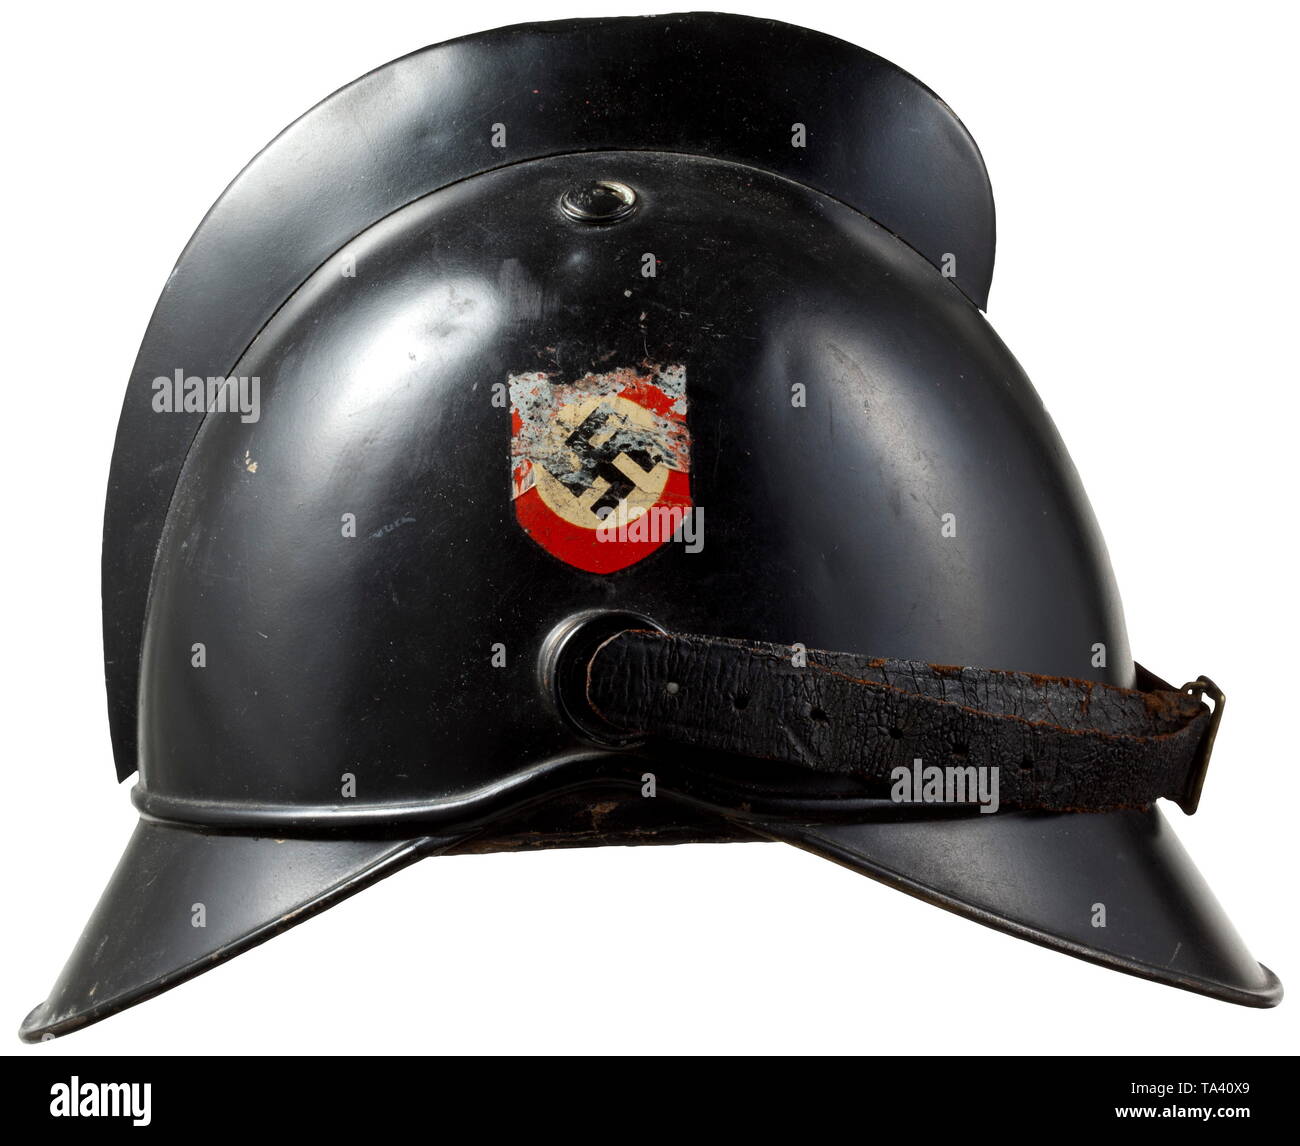 A helmet for members of the fire brigade adapted from a fire fighter helmet of the 19th century historic, historical, State, state-controled, state-run, organisations, organizations, organization, organisation, object, objects, stills, clipping, clippings, cut out, cut-out, cut-outs, utensil, piece of equipment, utensils, Additional-Rights-Clearance-Info-Not-Available Stock Photo